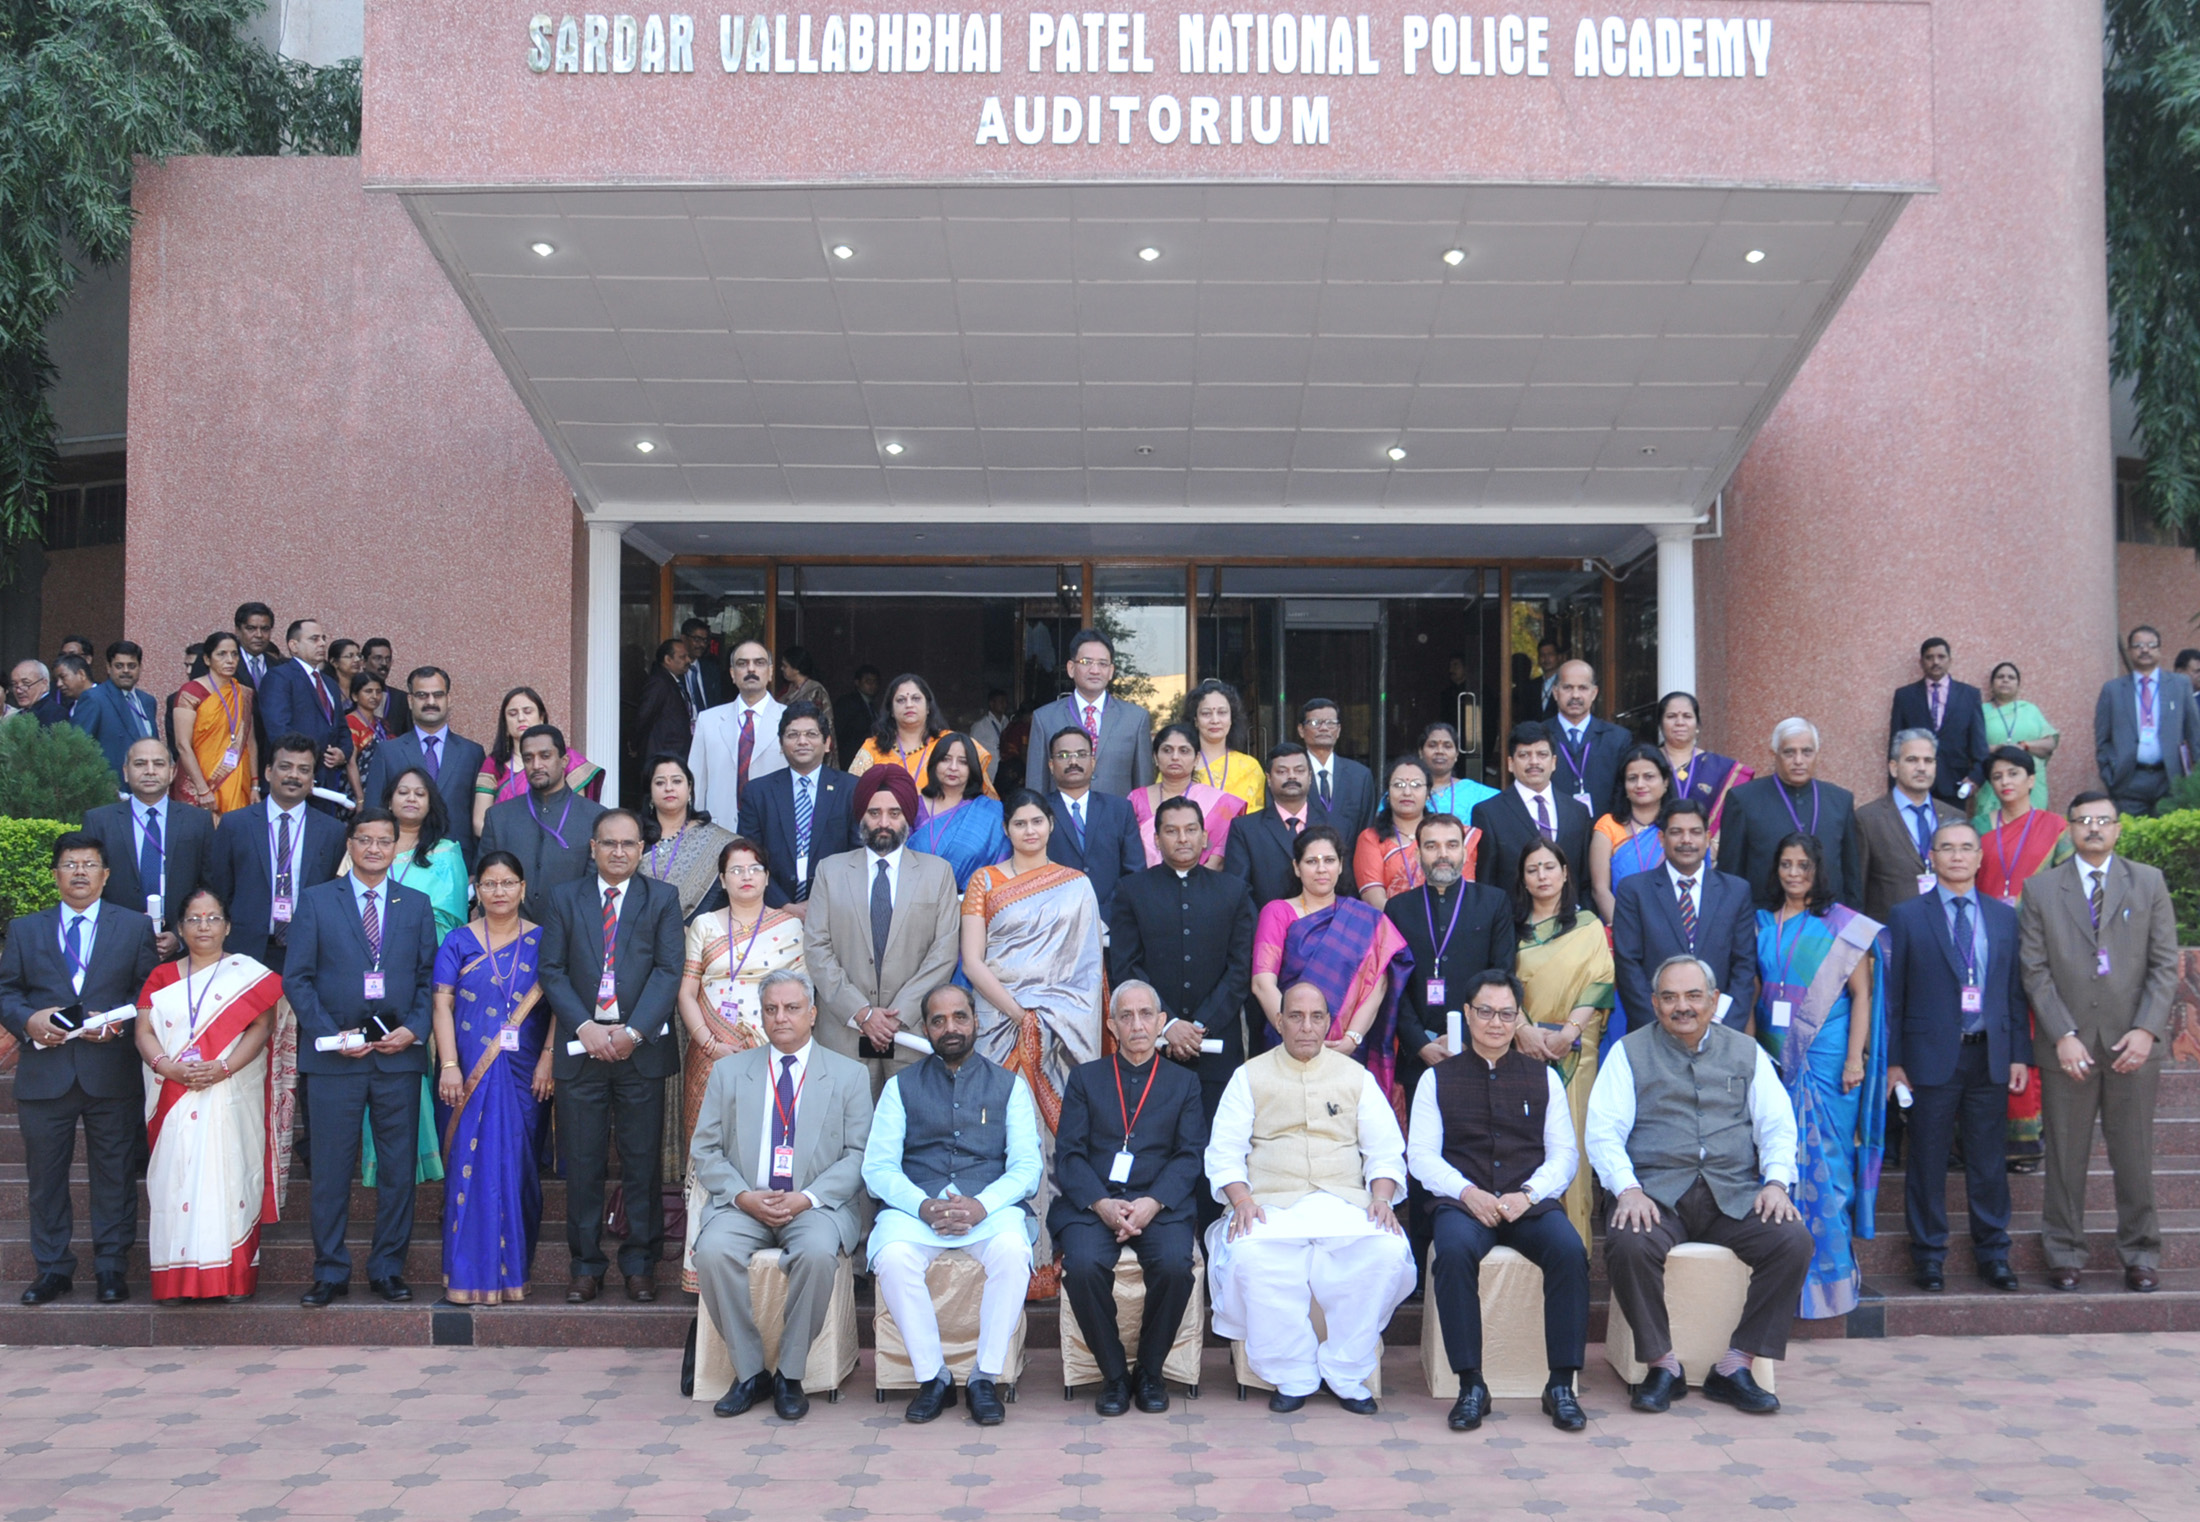 The Union Home Minister, Shri Rajnath Singh in a group photograph with the winners of Police Medals, during the All India Conference of DGPs/IGPs, 2016, at Sardar Vallabhbhai Patel National Police Academy, in Hyderabad on November 25, 2016. 	The Ministers of State for Home Affairs, Shri Kiren Rijiju & Shri Hansraj Gangaram Ahir, the Union Home Secretary Shri Rajiv Mehrishi and senior officers are also seen.